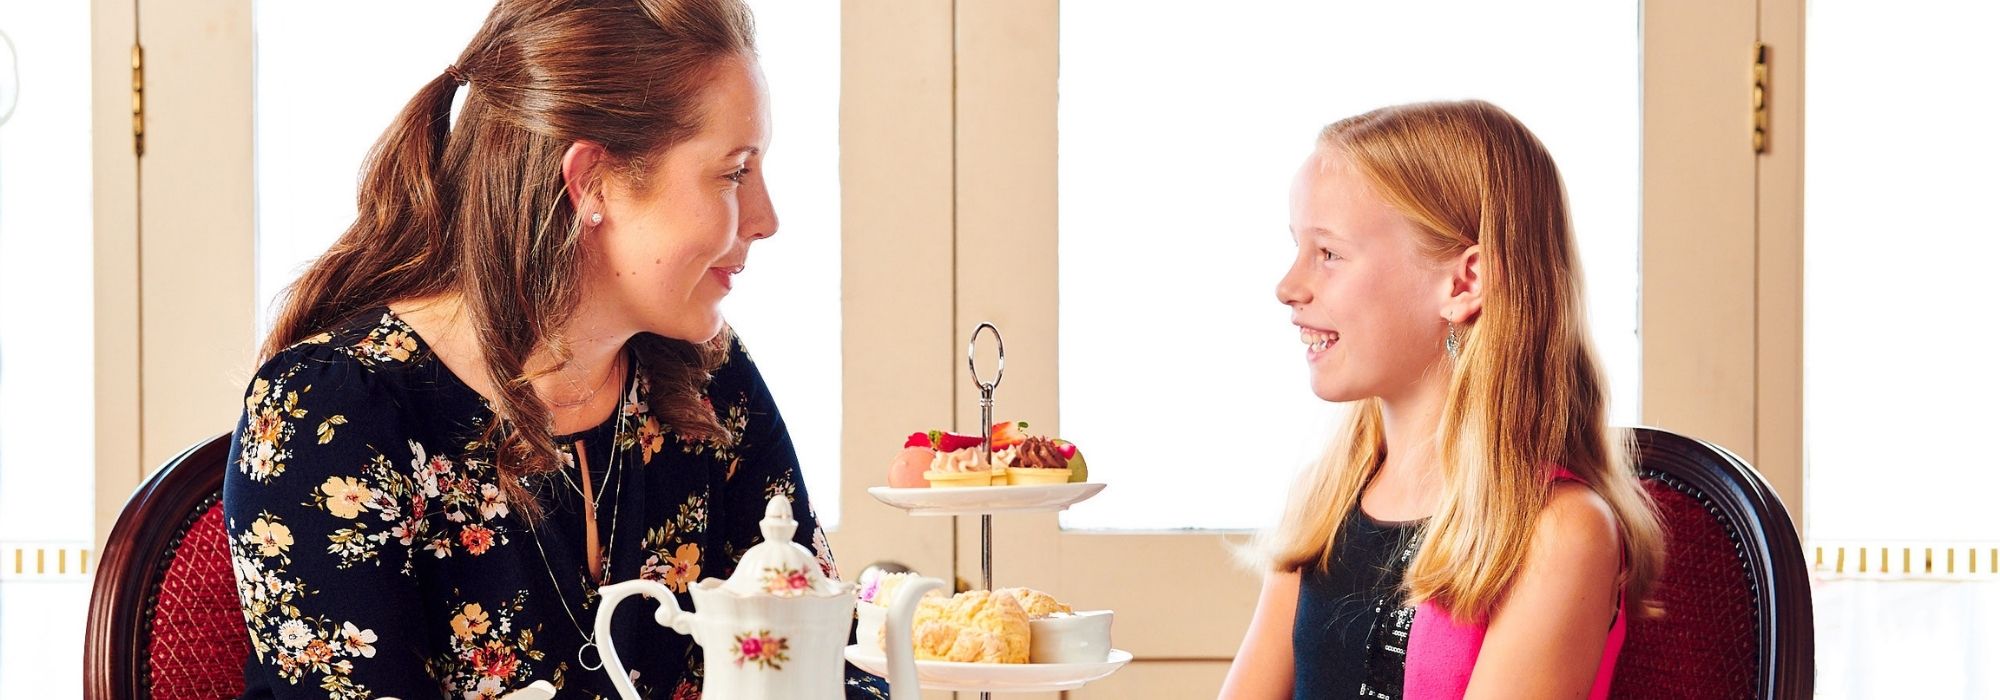 Mother’s Day feasts fit for the queen in your family